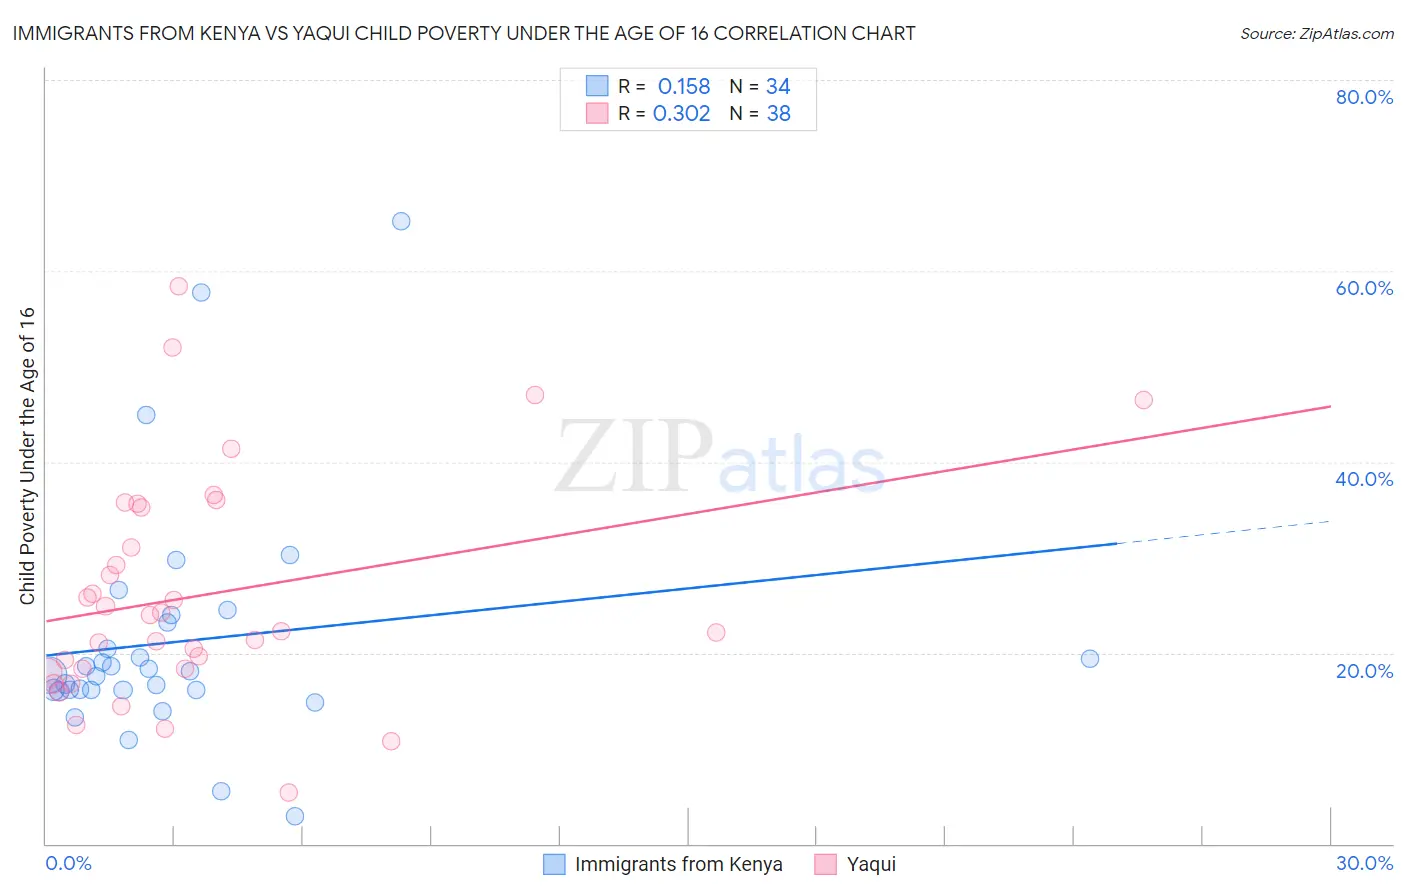 Immigrants from Kenya vs Yaqui Child Poverty Under the Age of 16